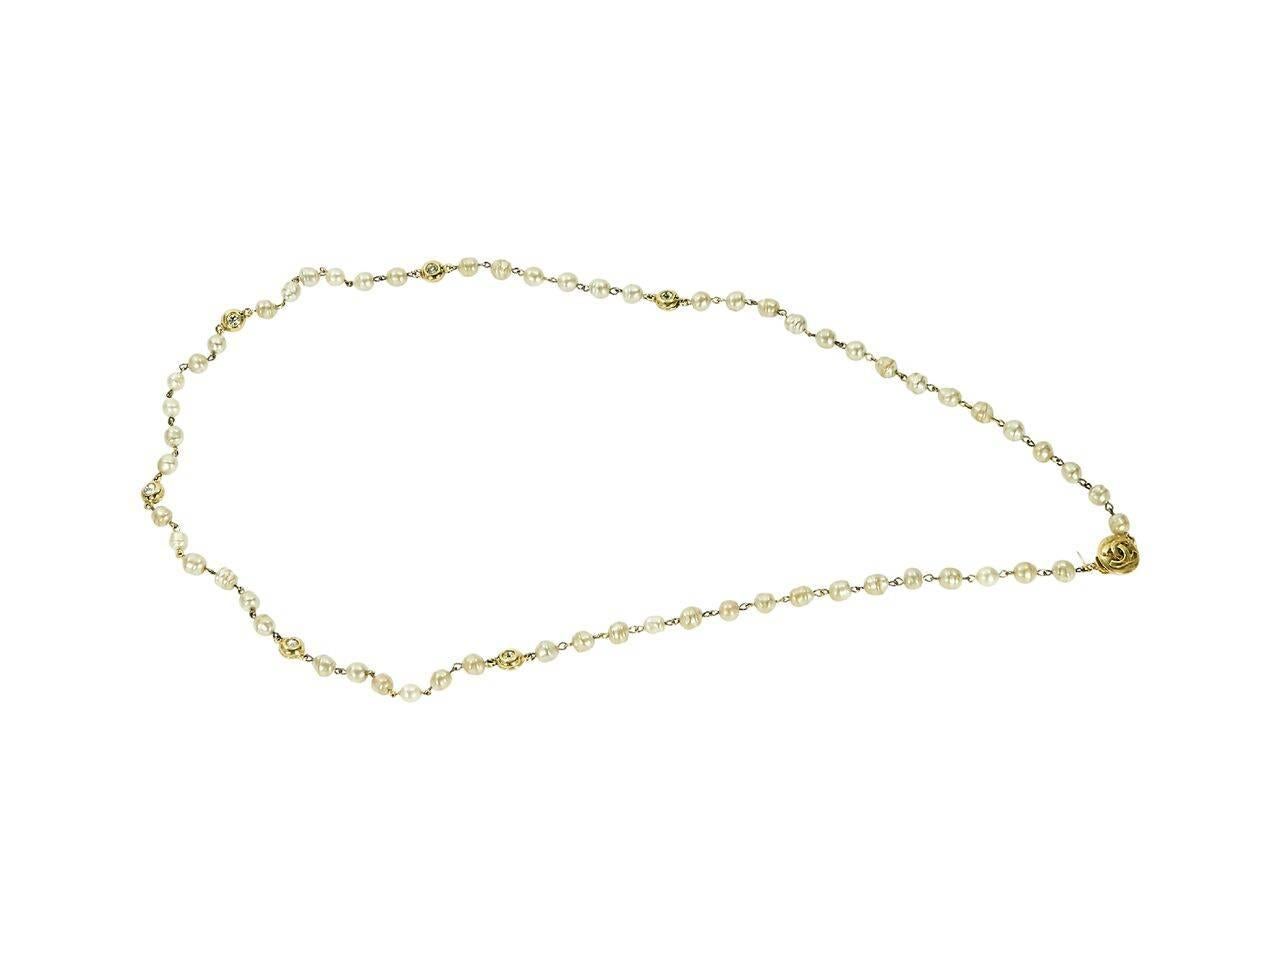 Product details:  Vintage goldtone faux pearl necklace by Chanel.  Single strand design that can be wrapped.  Accented with logo and crystal charms.  36